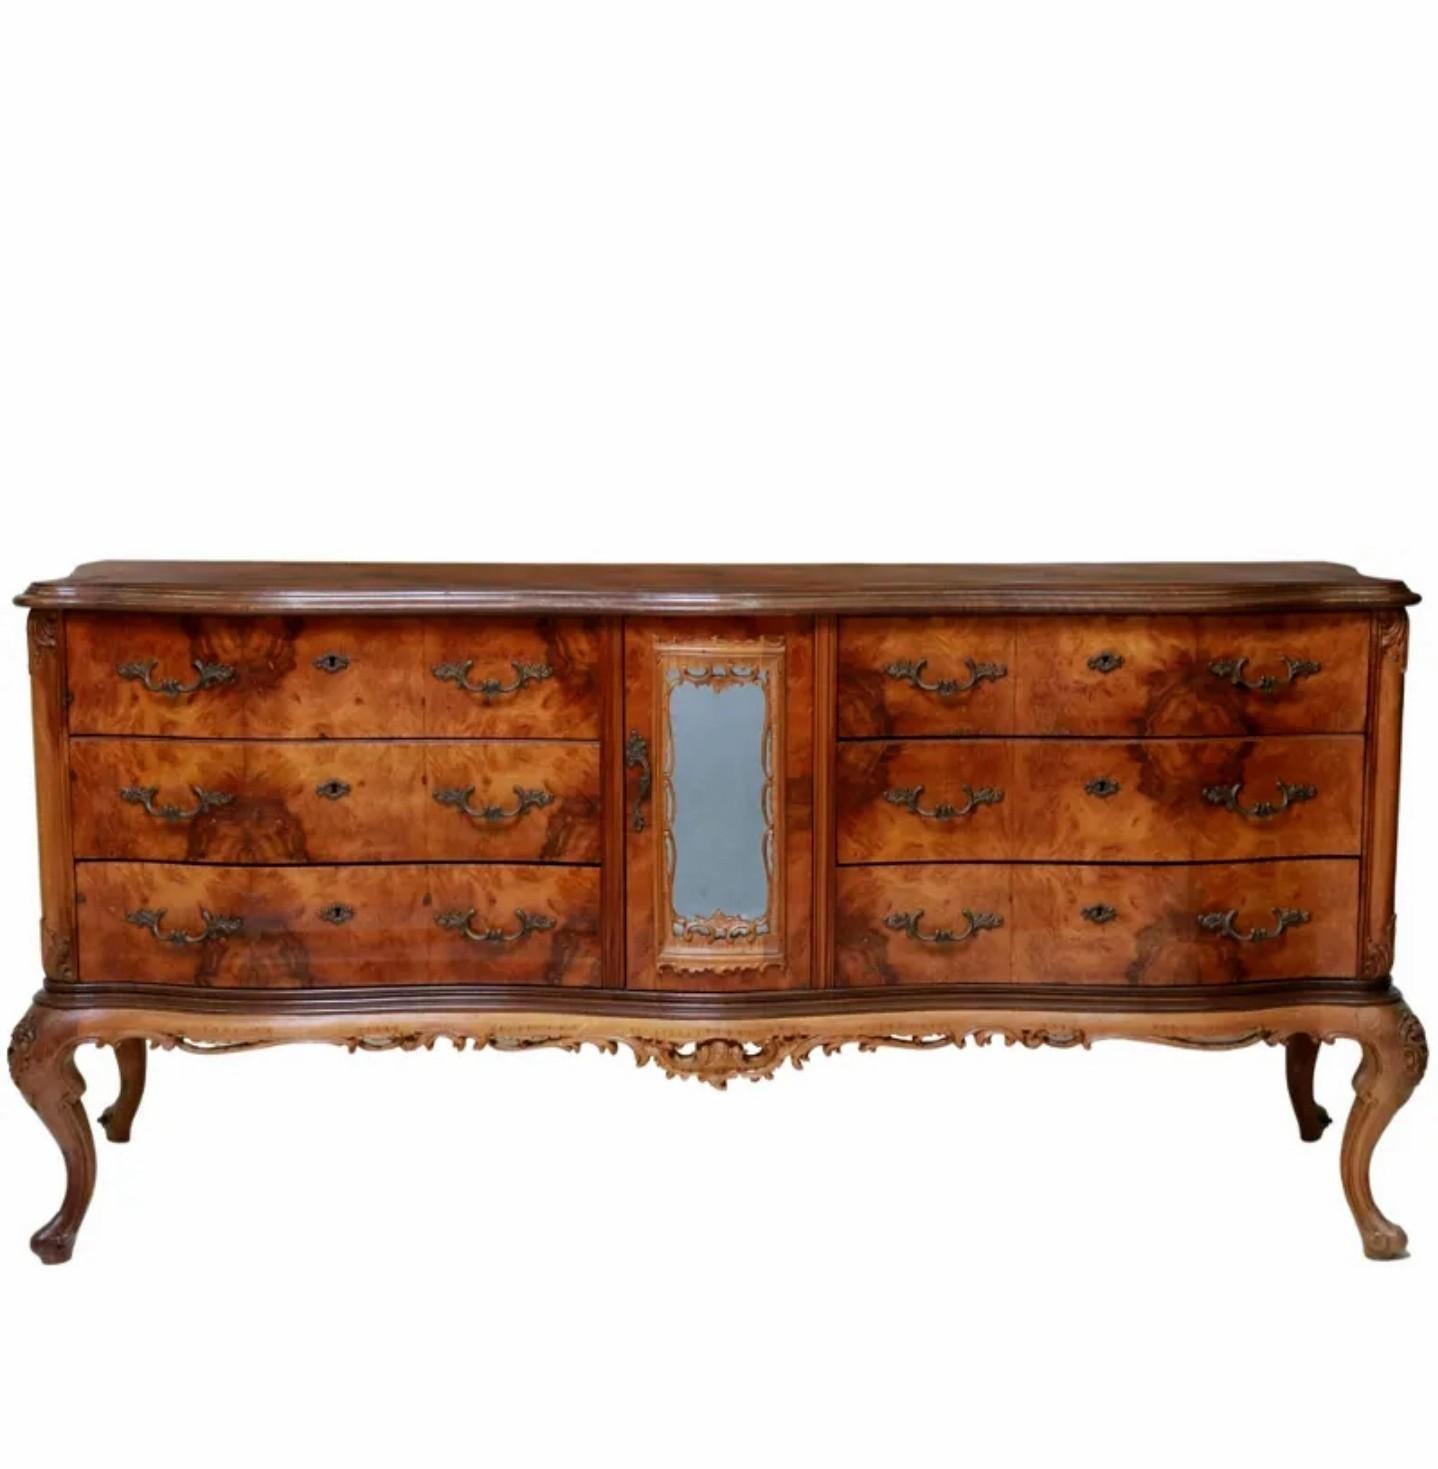 A stunning grand Italian midcentury Venetian Baroque patchwork burlwood sideboard.

Exquisitely handcrafted of warm richly figured burled walnut, born in the Veneto region of Northeastern Italy, circa 1940s, featuring a visually striking